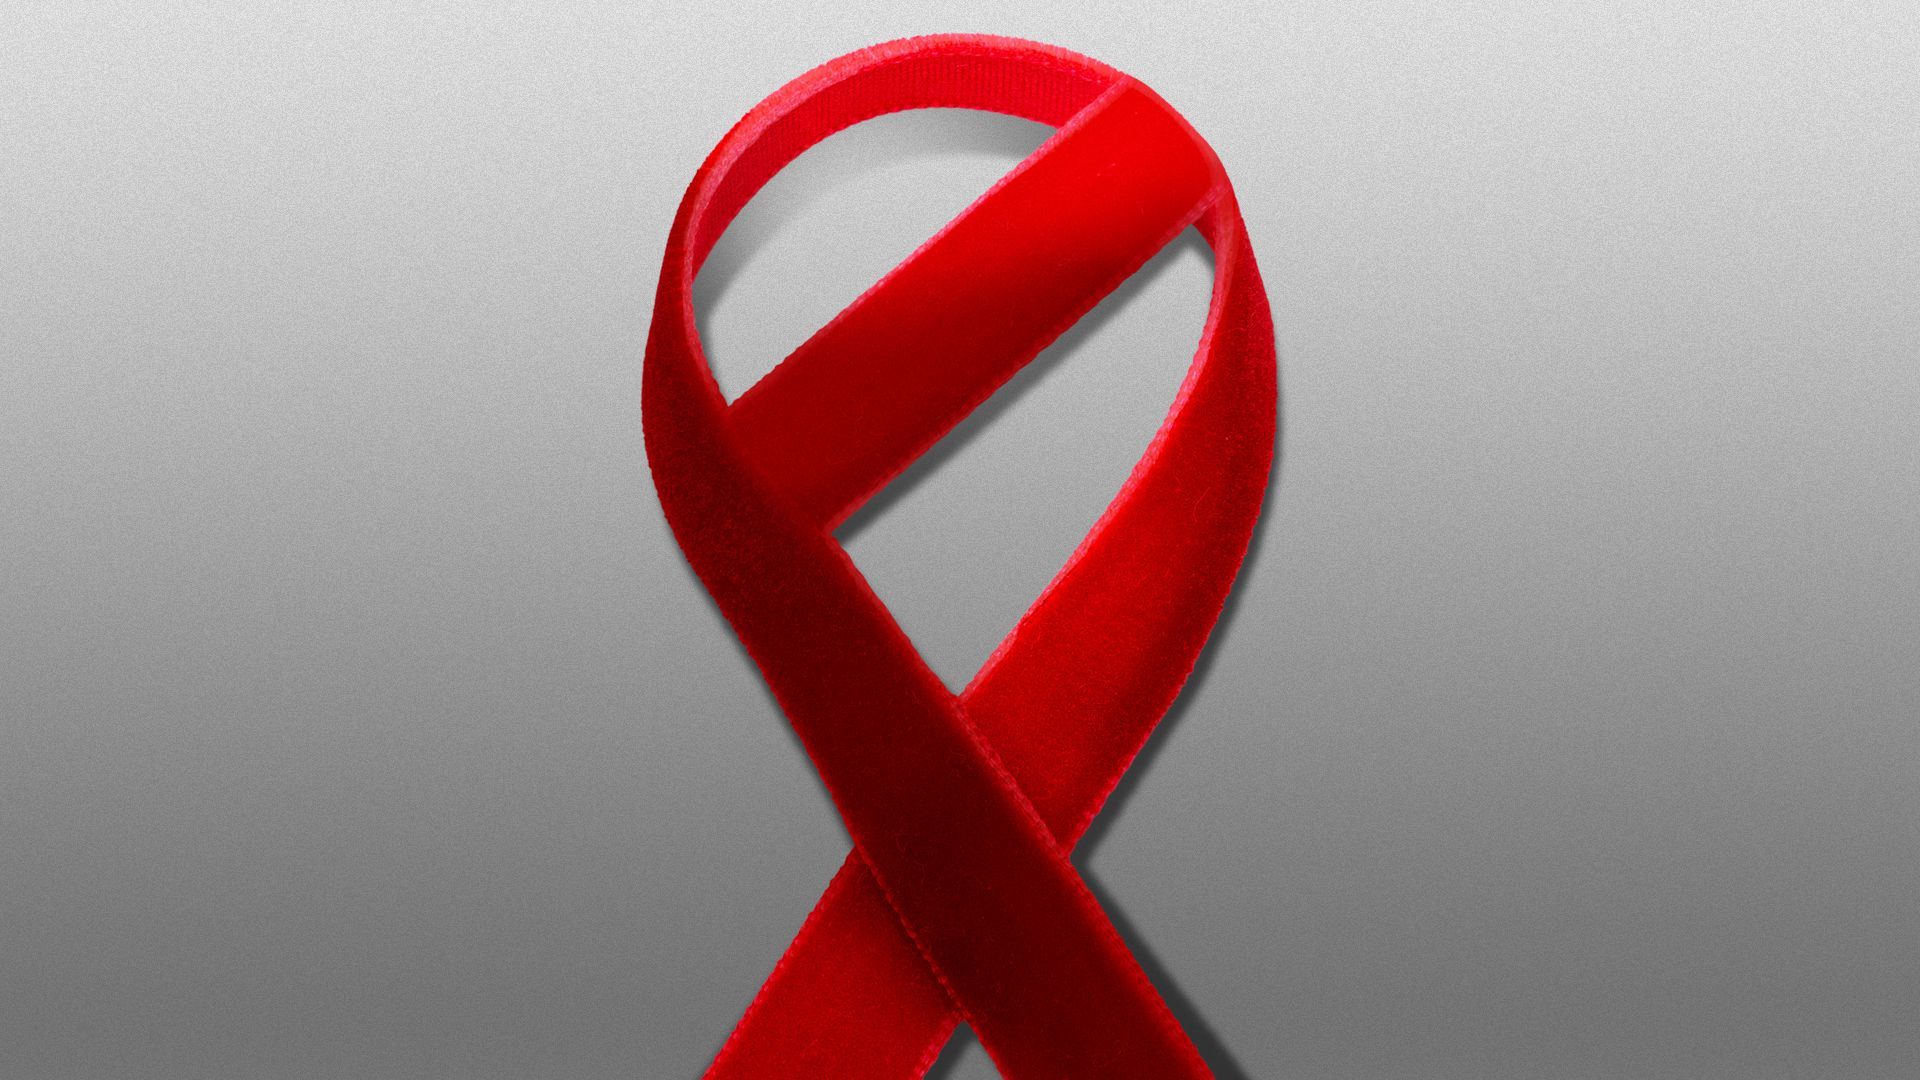 Illustration of a red AIDS awareness ribbon shaped like a "no" sign 